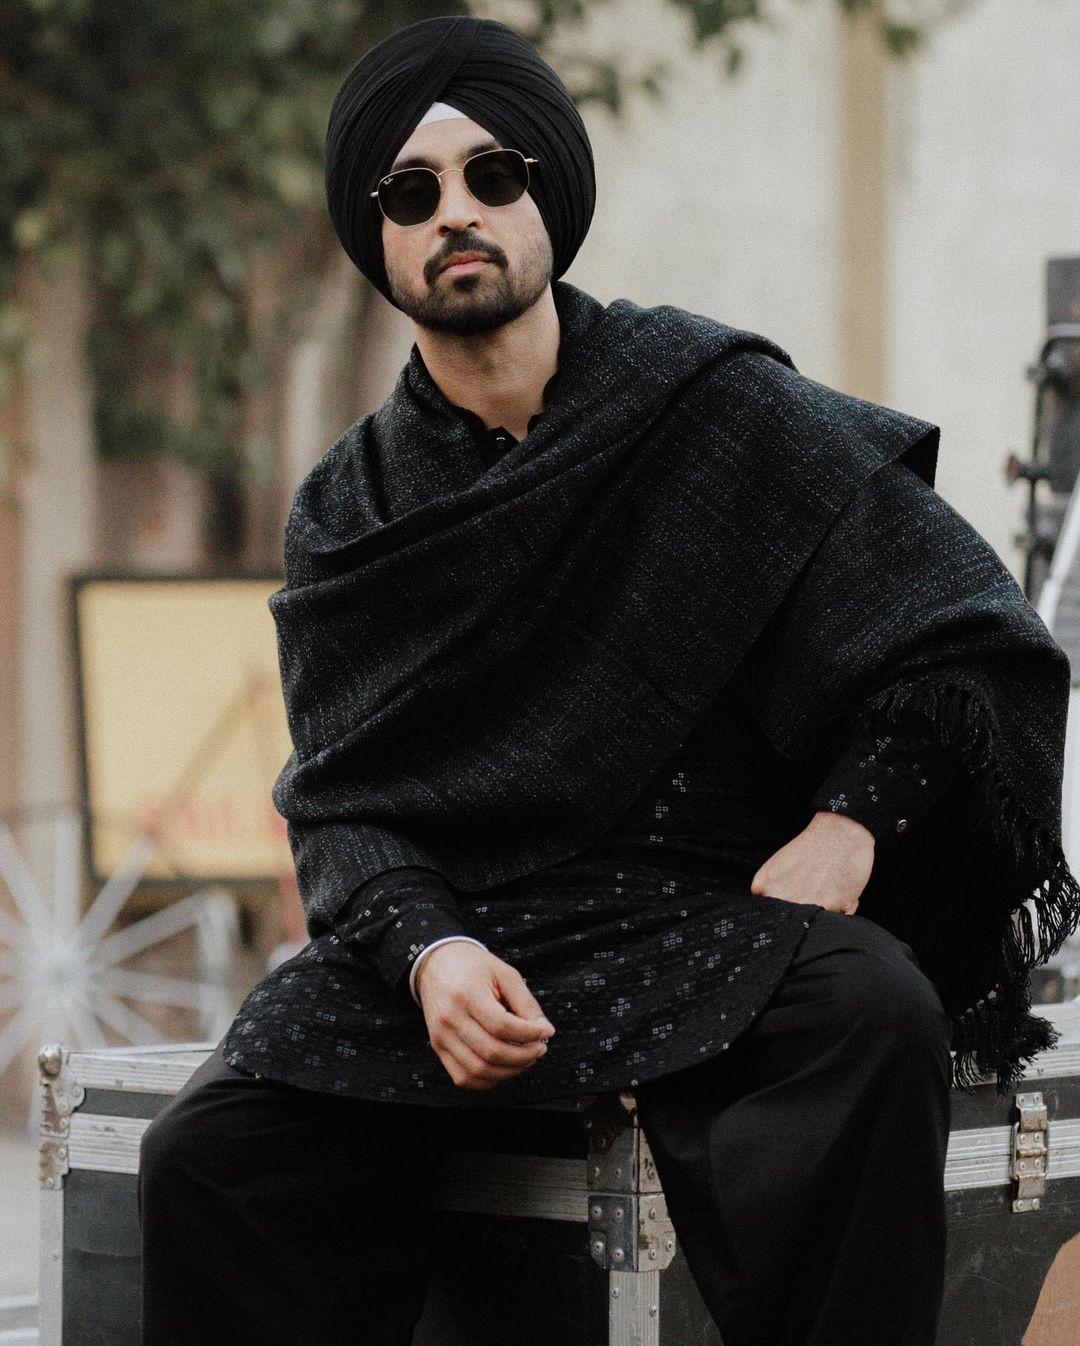 Another all black moment for the ages, Diljit Dosanjh wore this ensemble that drove his Insta fam nuts